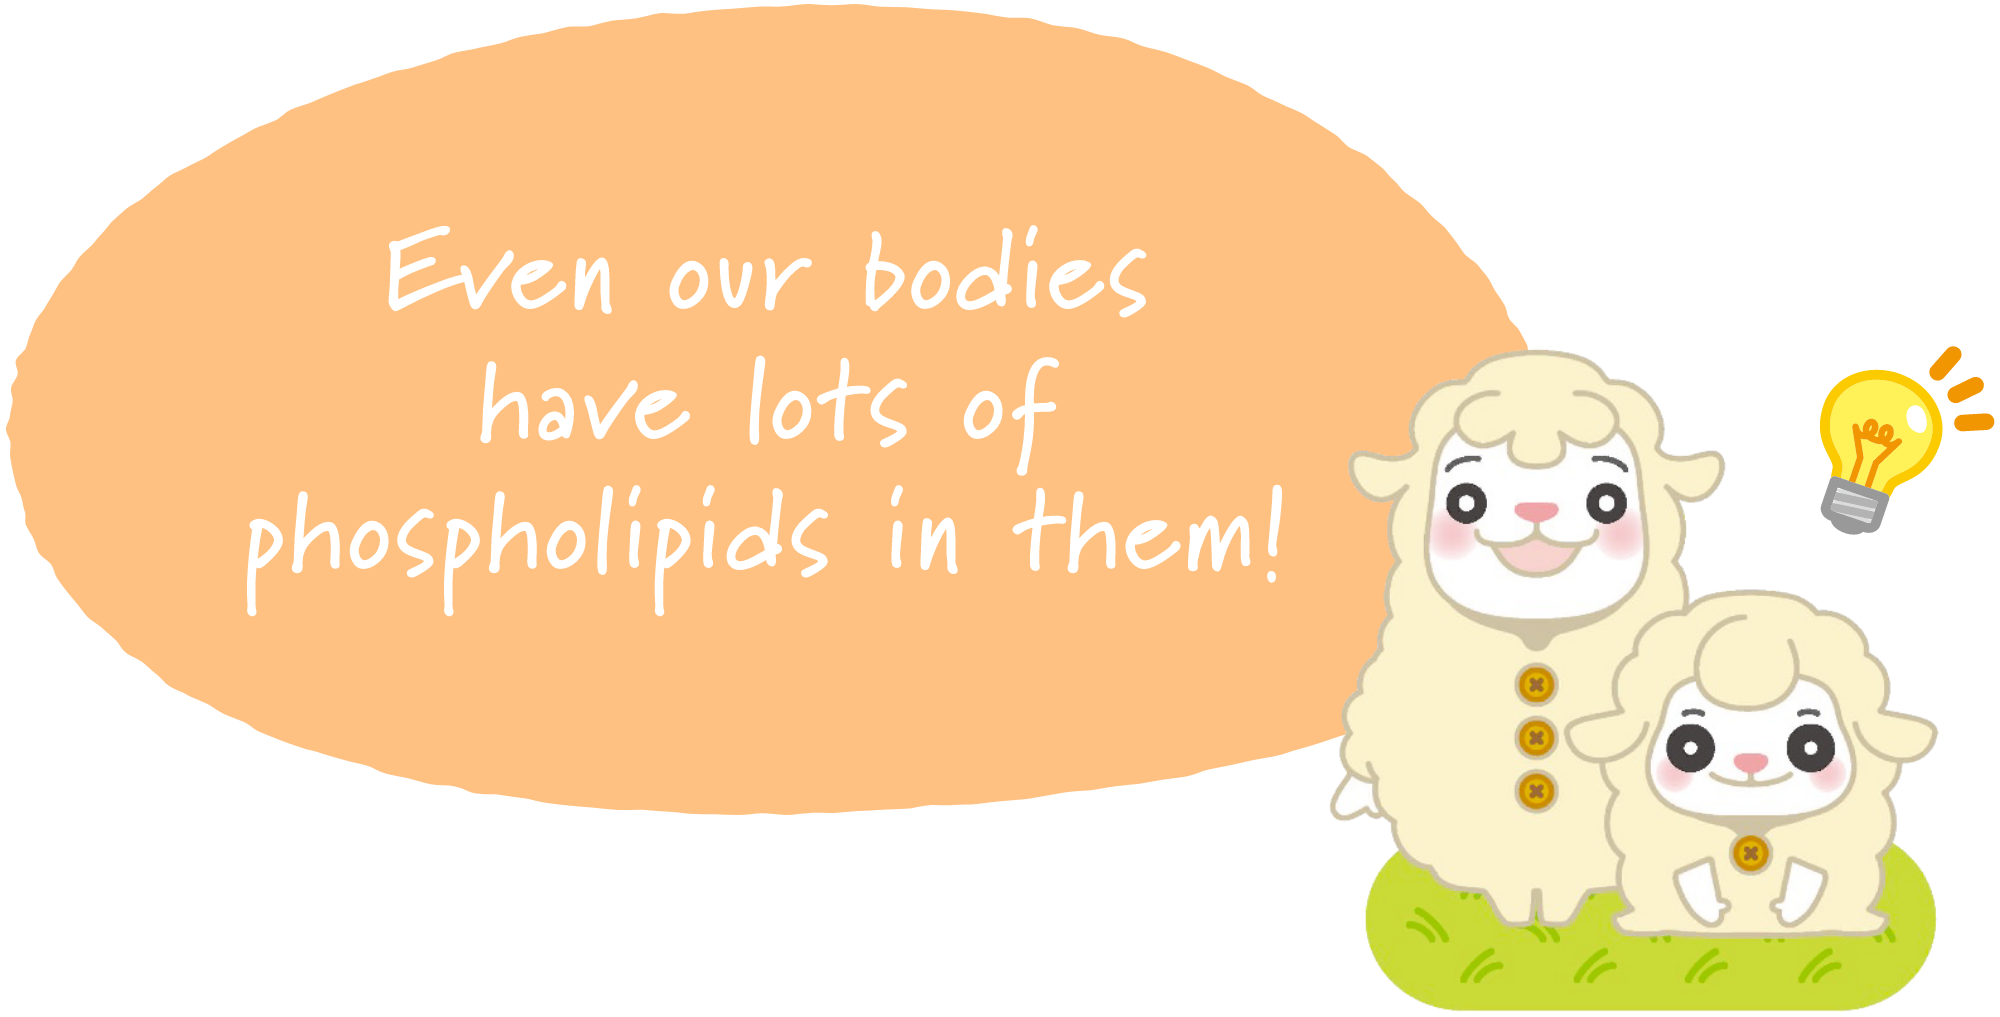 Even our bodies have lots of phospholipids in them!